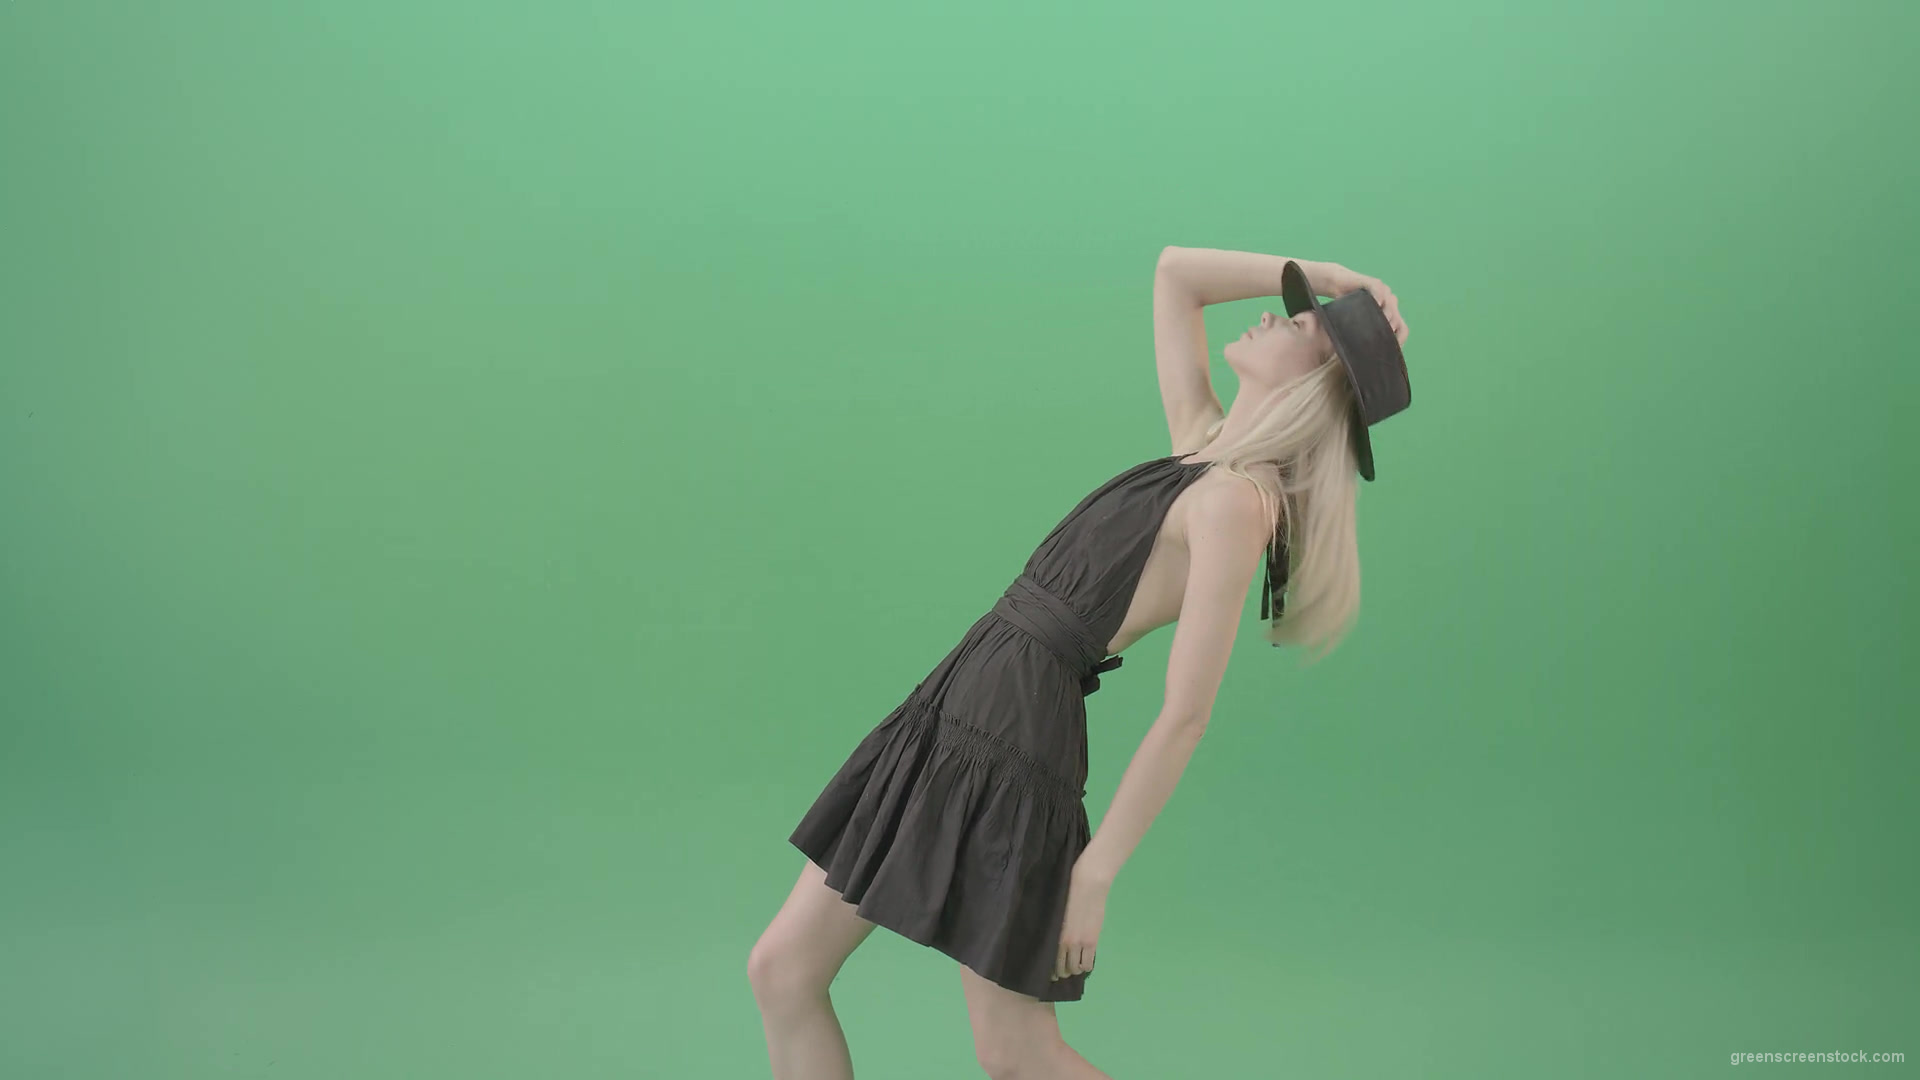 Video-Art-Fashion-Dance-by-Girl-in-black-outlet-and-dark-hat-on-green-screen-Video-Footage-1920_004 Green Screen Stock